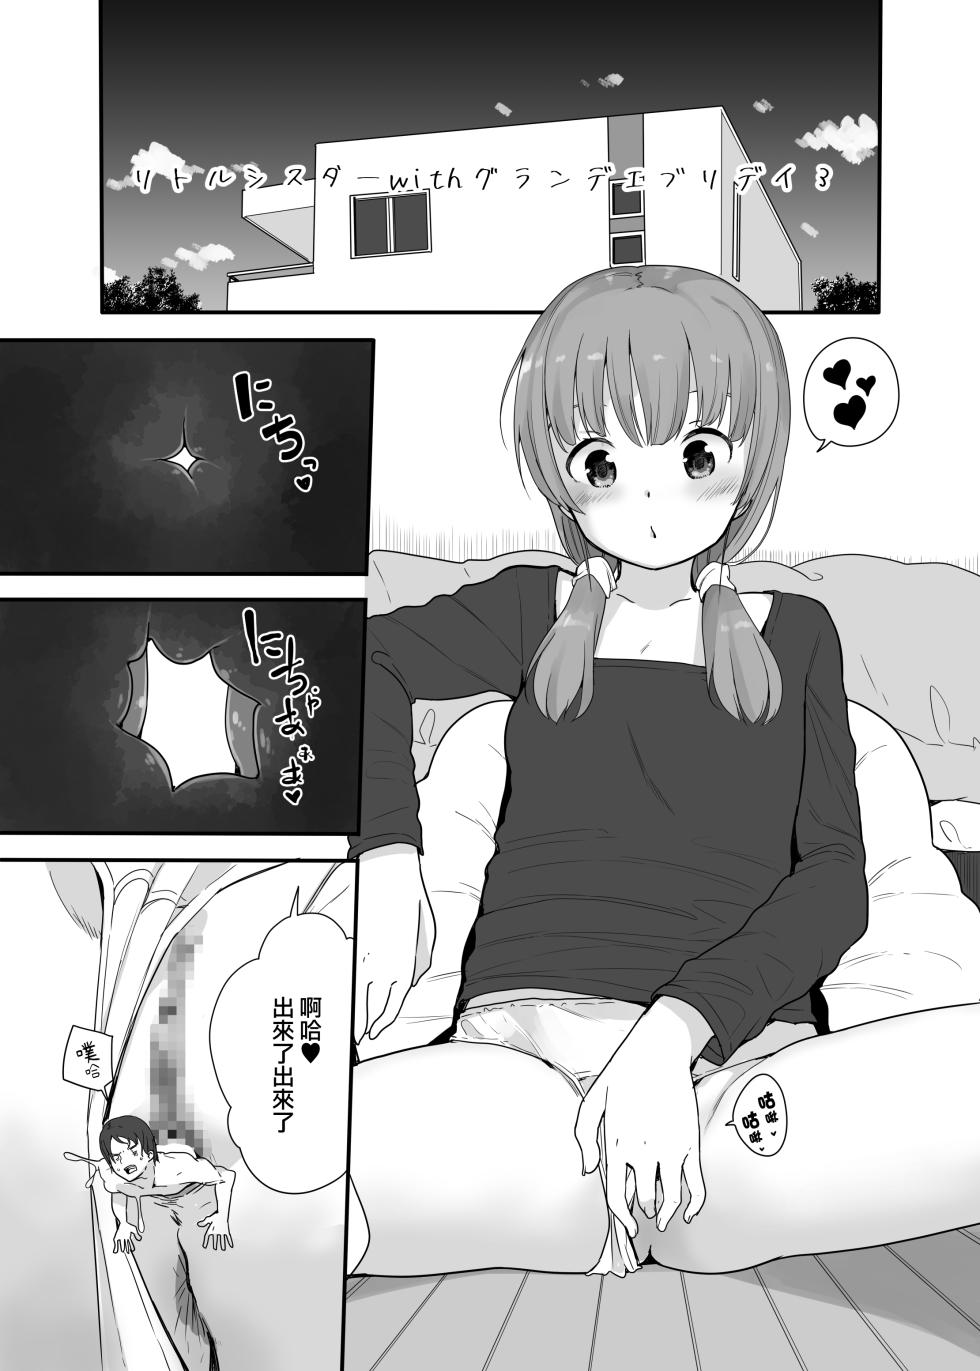 [Fuyunonchi (Fuyuno Mikan)] Little Sister With Grande Everyday 3  [Chinese] [沒有漢化] - Page 2